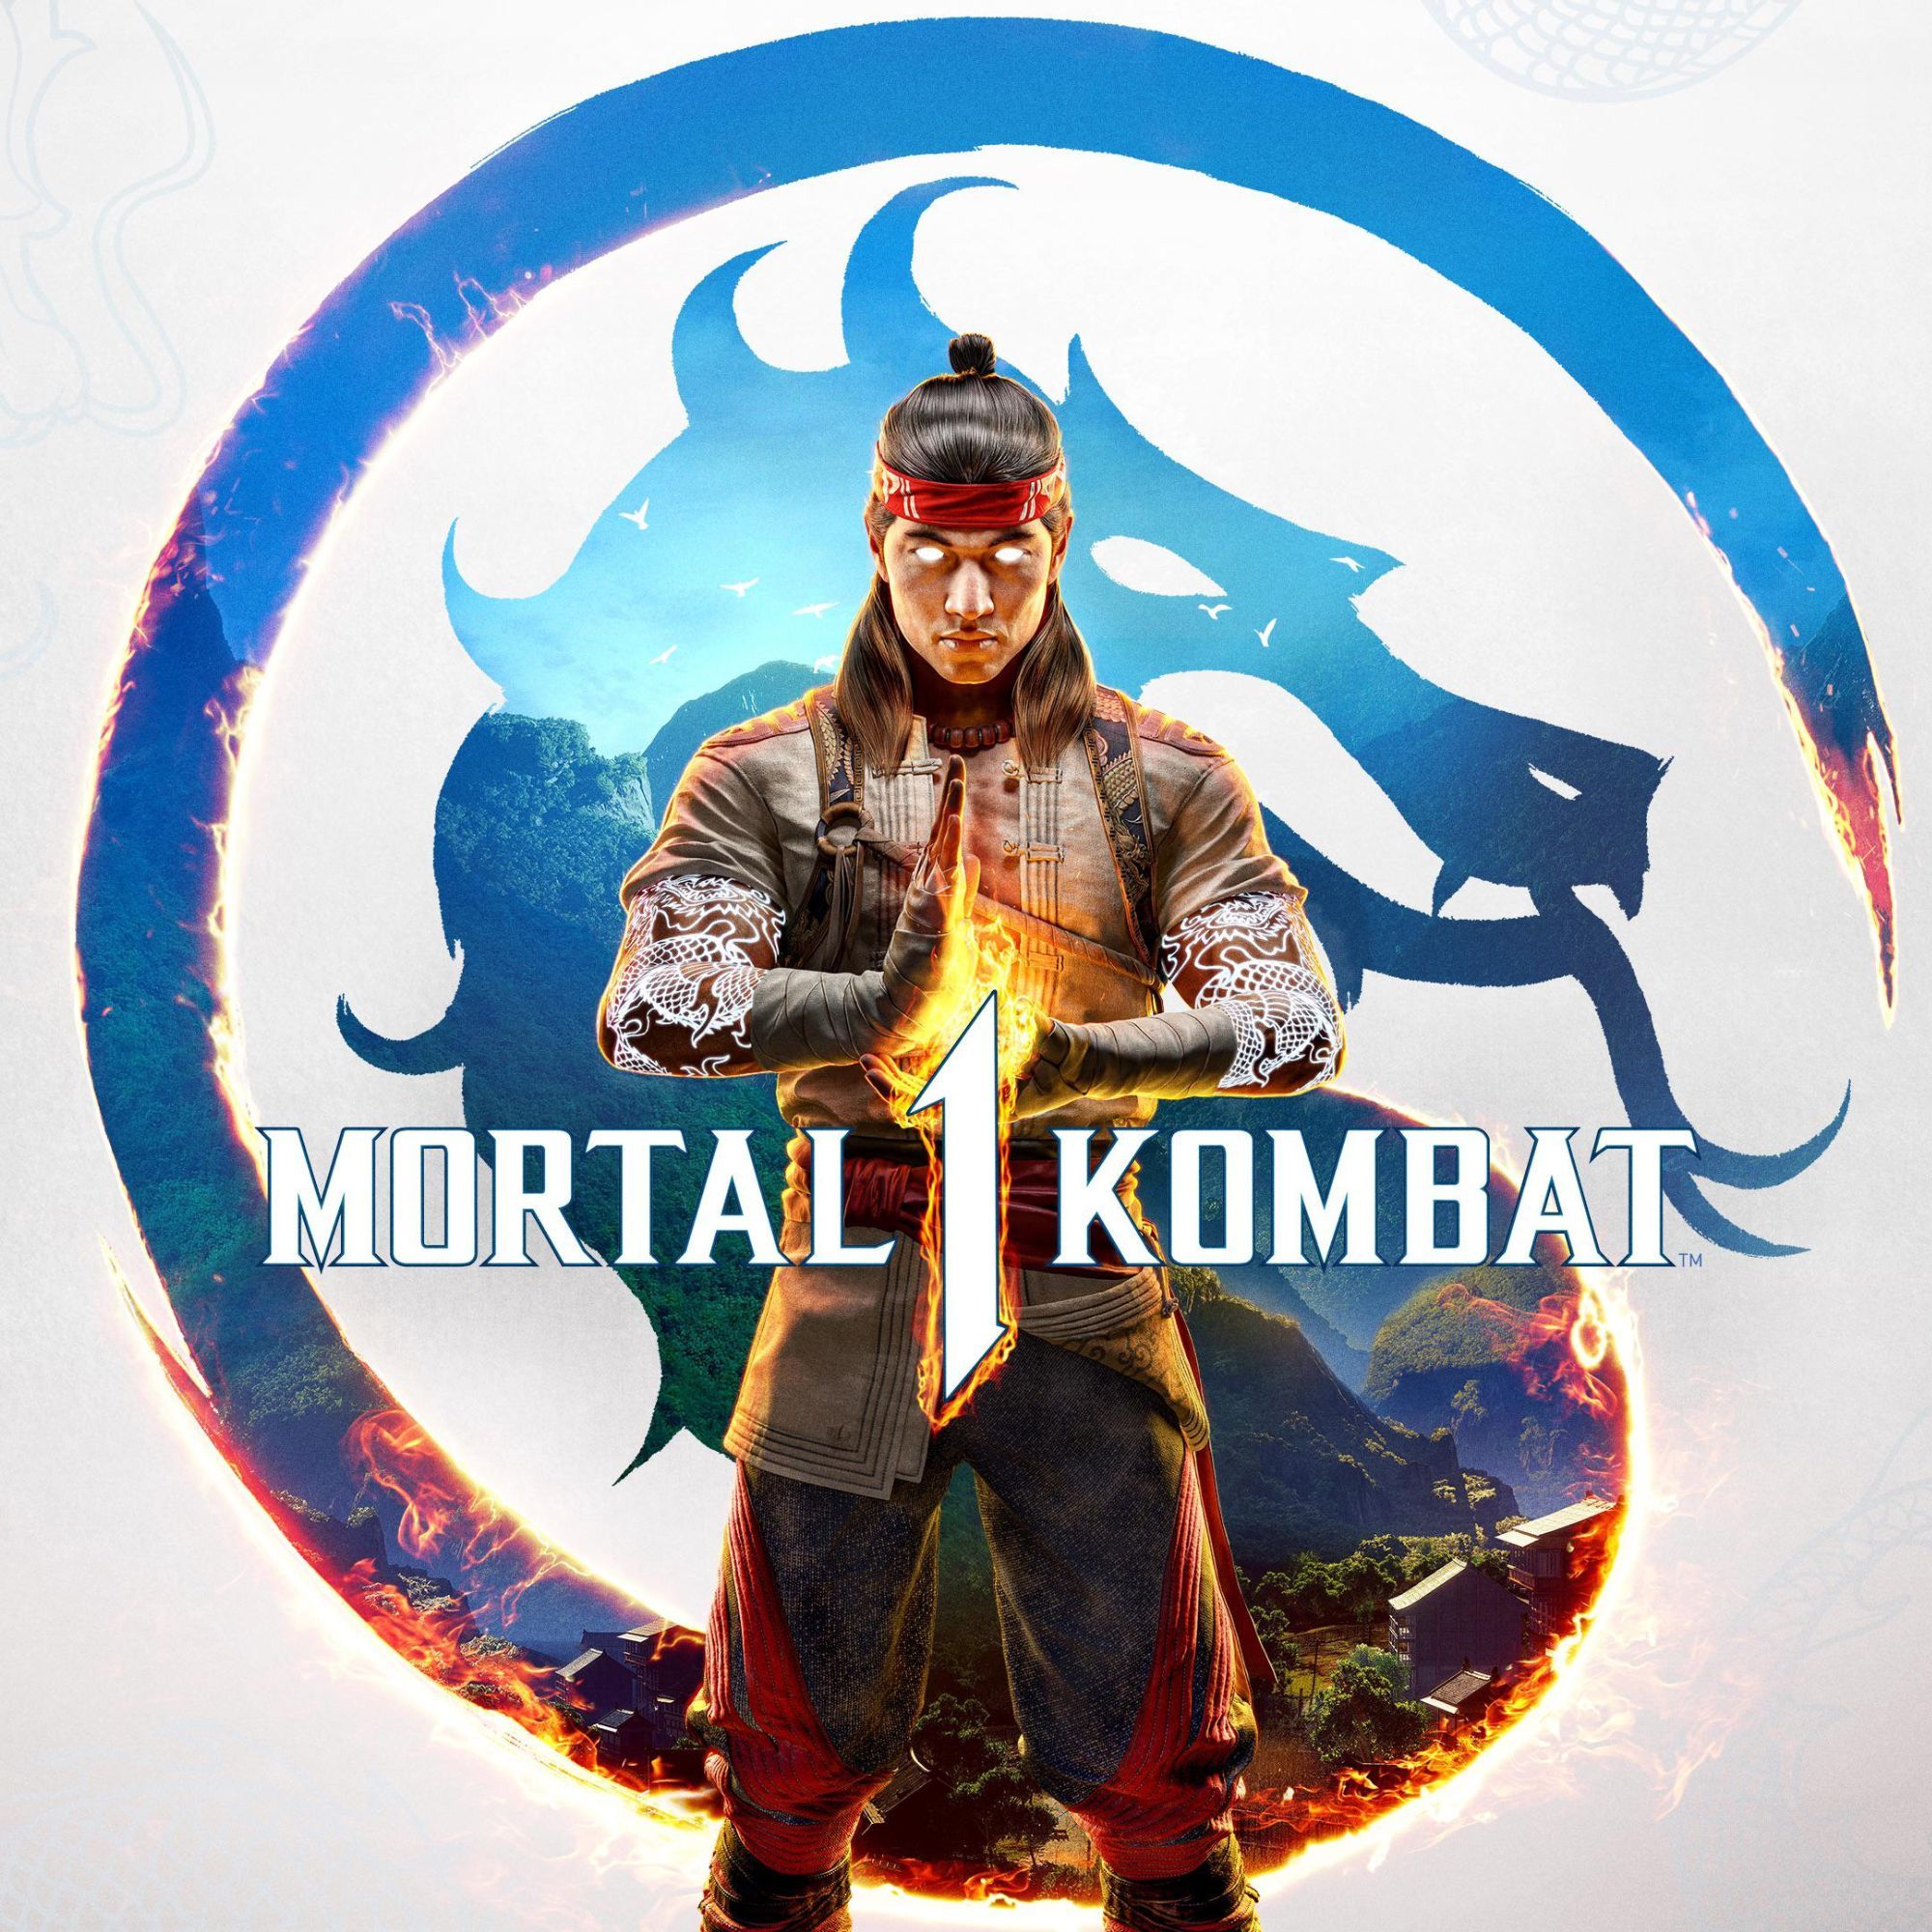 Cover image for Mortal Kombat 1 with Lui Kang standing hands together in within the dragon logo in a 2000x2000 format